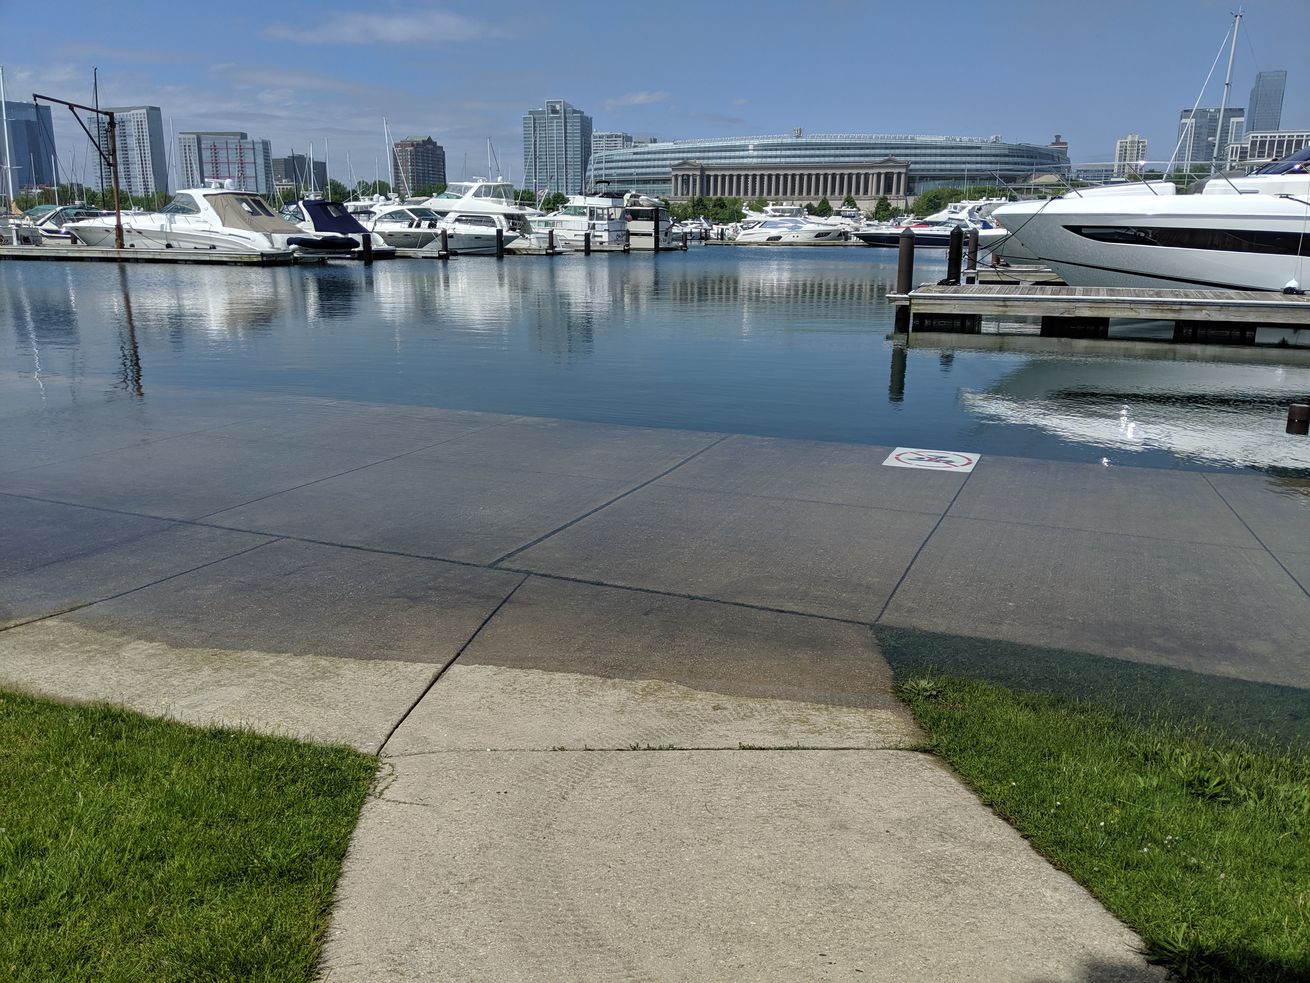 During level swings at Burnham Harbor, the high levels on Lake Michigan flood the sidewalk on Northerly Island across from Soldier Field.